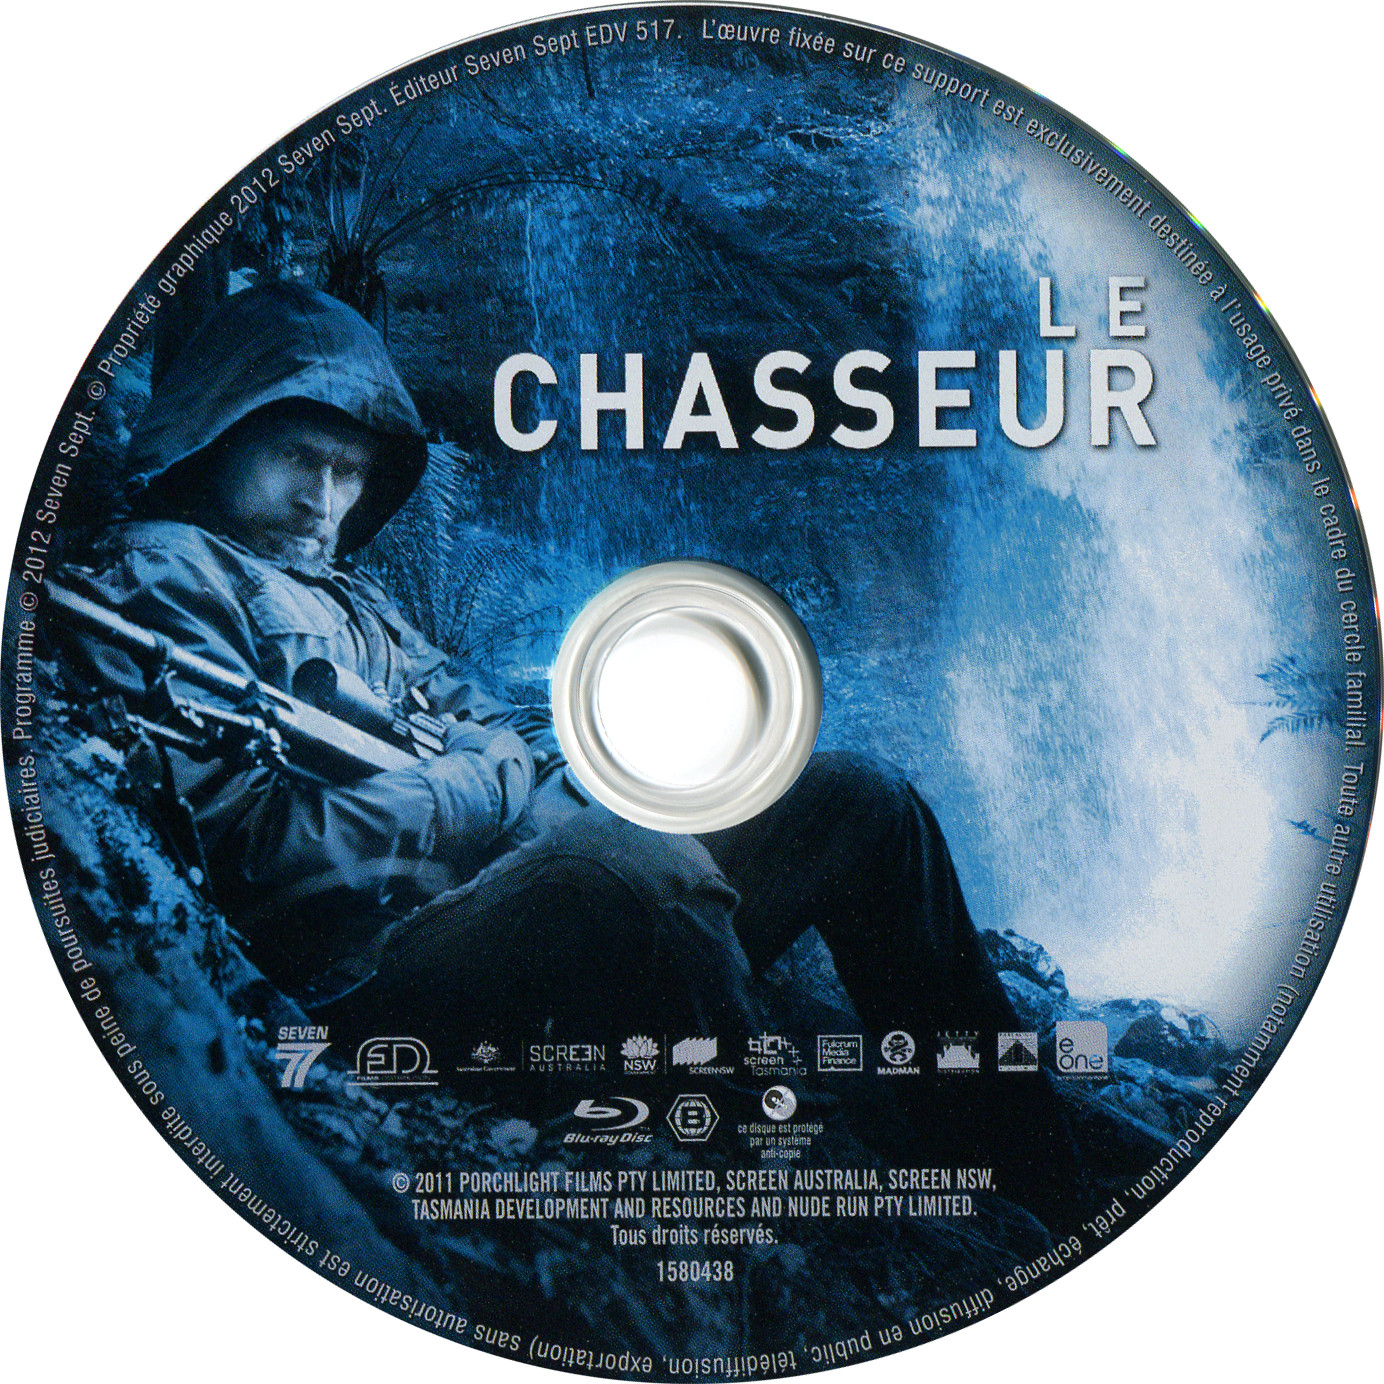 Le Chasseur (2012) (BLU-RAY)